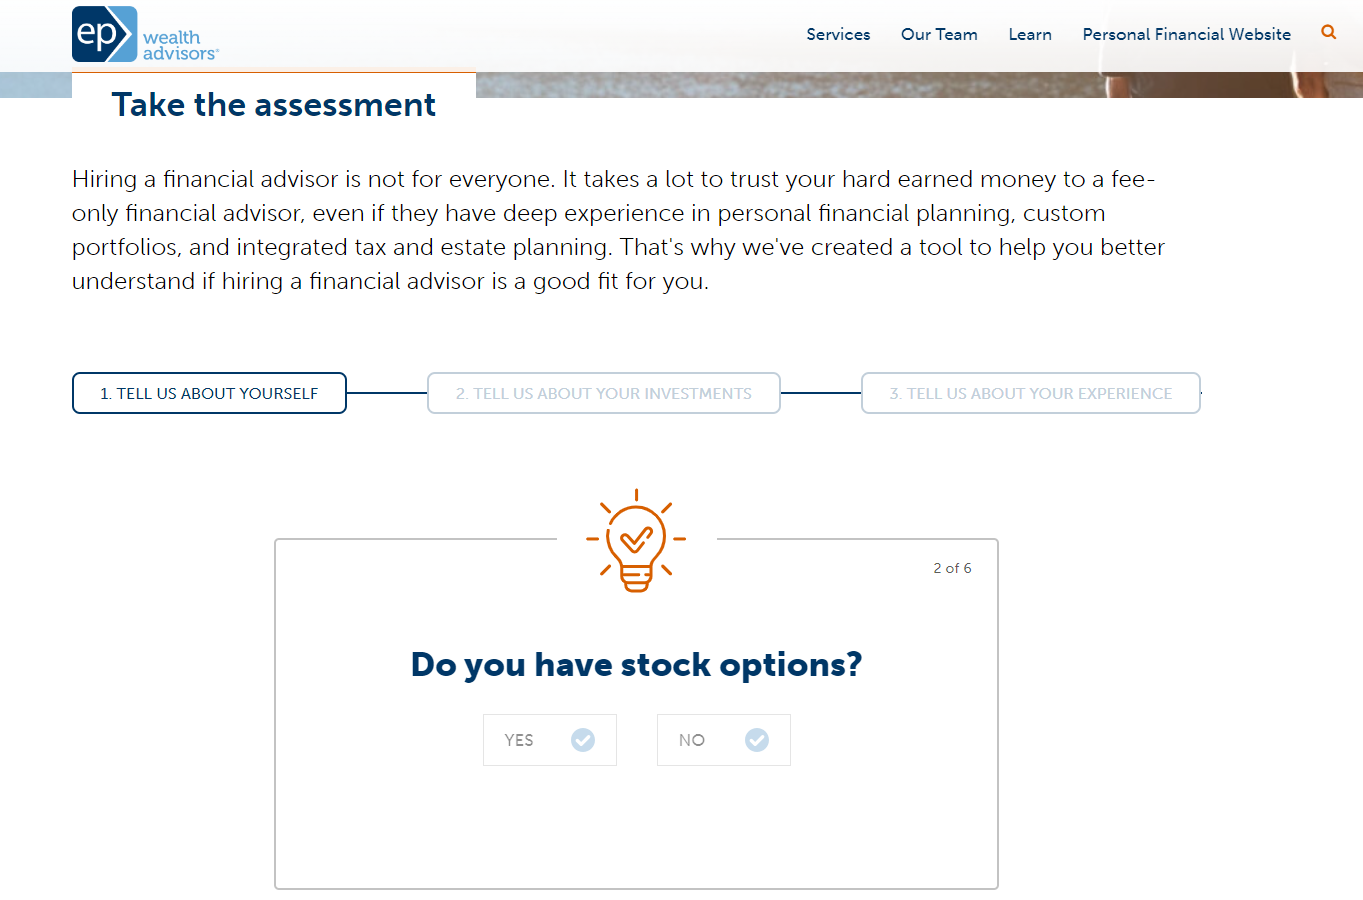 The quiz on the EP Wealth Advisors lets the user check if they need the advisory services